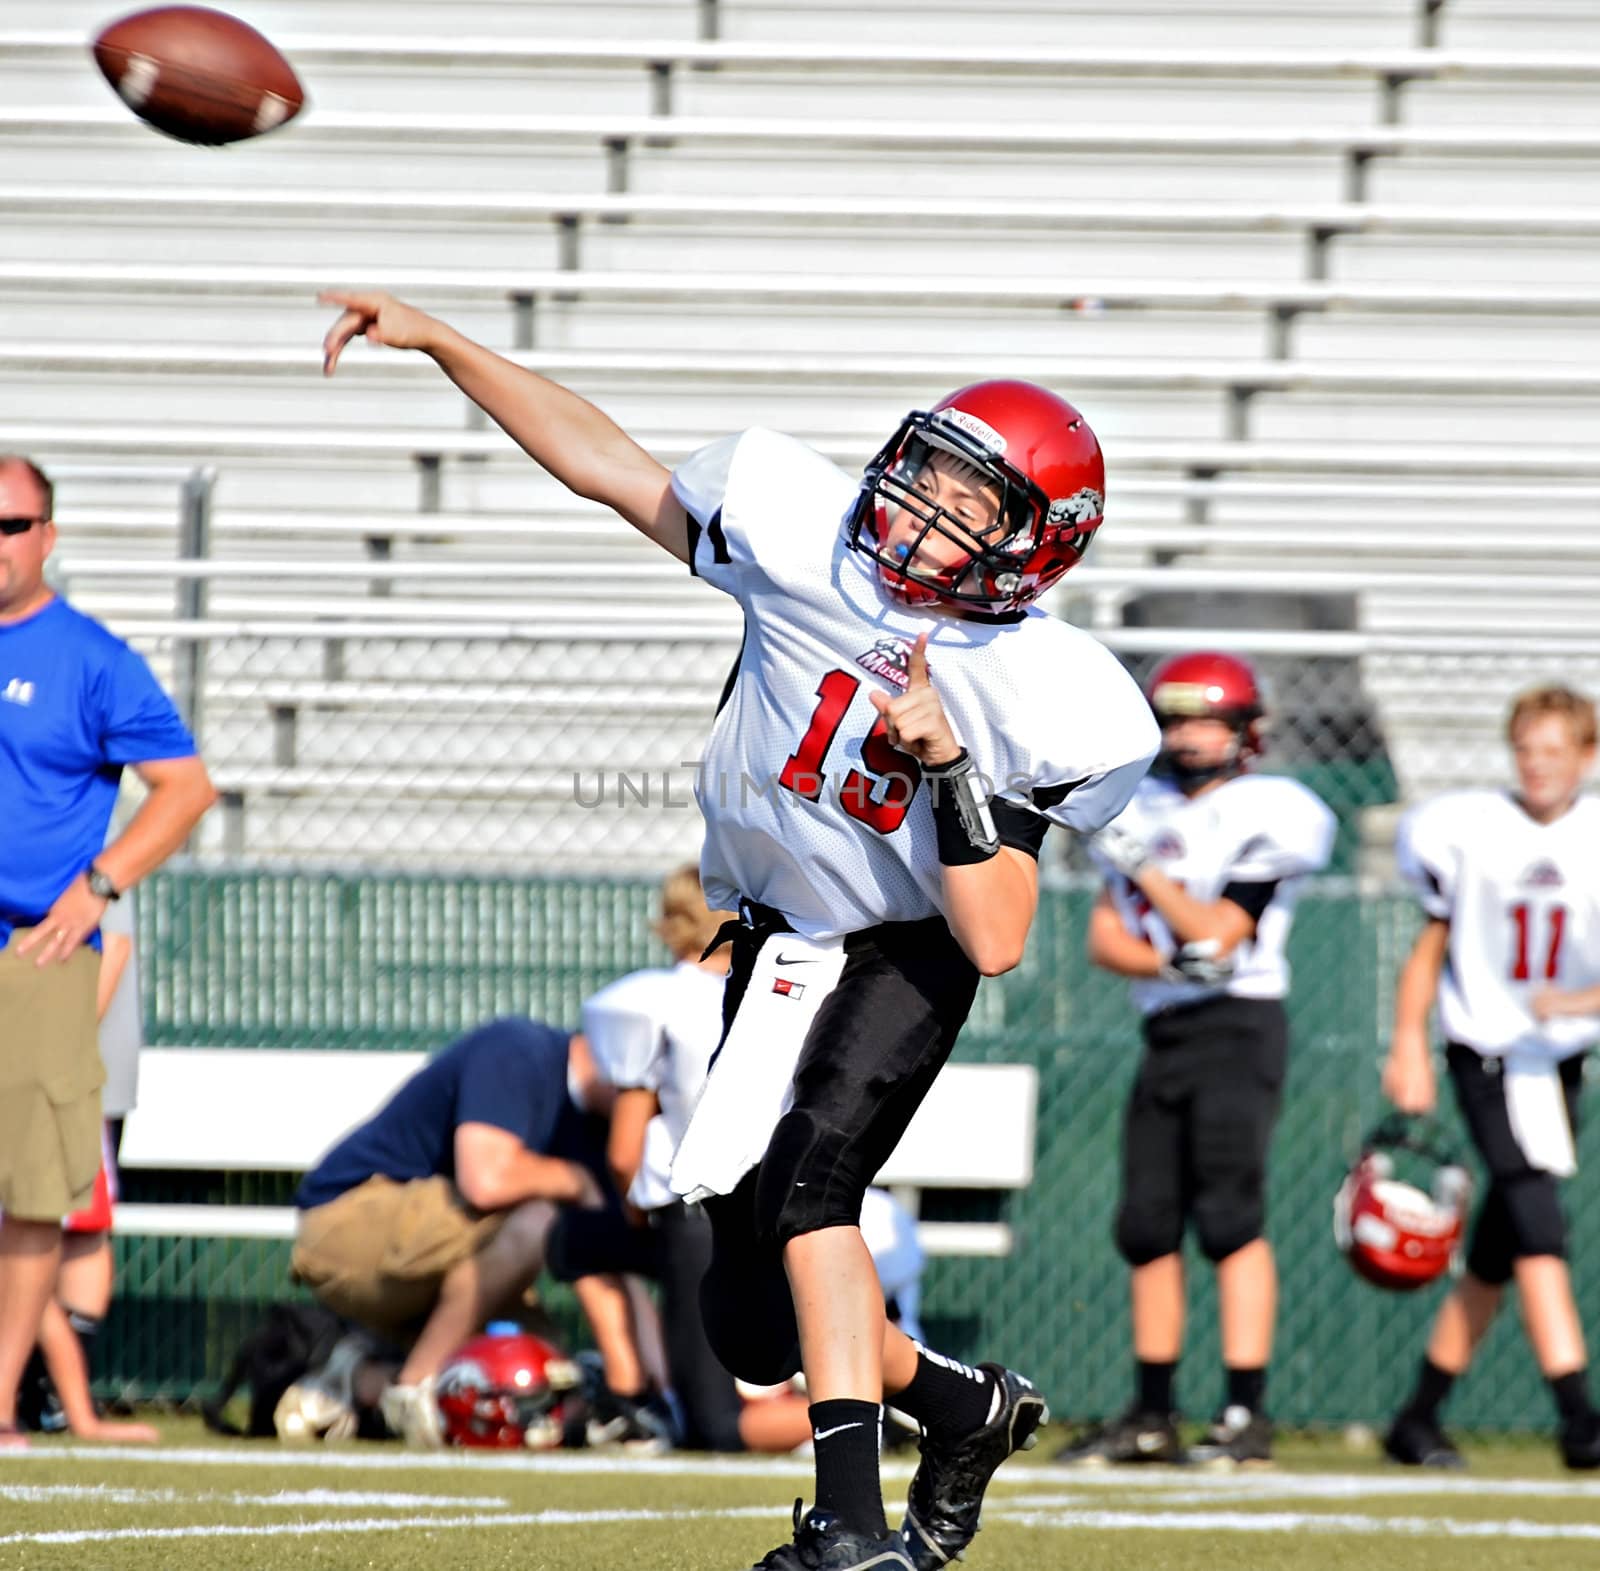 CUMMING, GA/USA - SEPTEMBER 8: Unidentified boy throwing a pass during a football game. A team of 7th grade boys September 8, 2012 in Cumming GA. The Wildcats  vs The Mustangs.